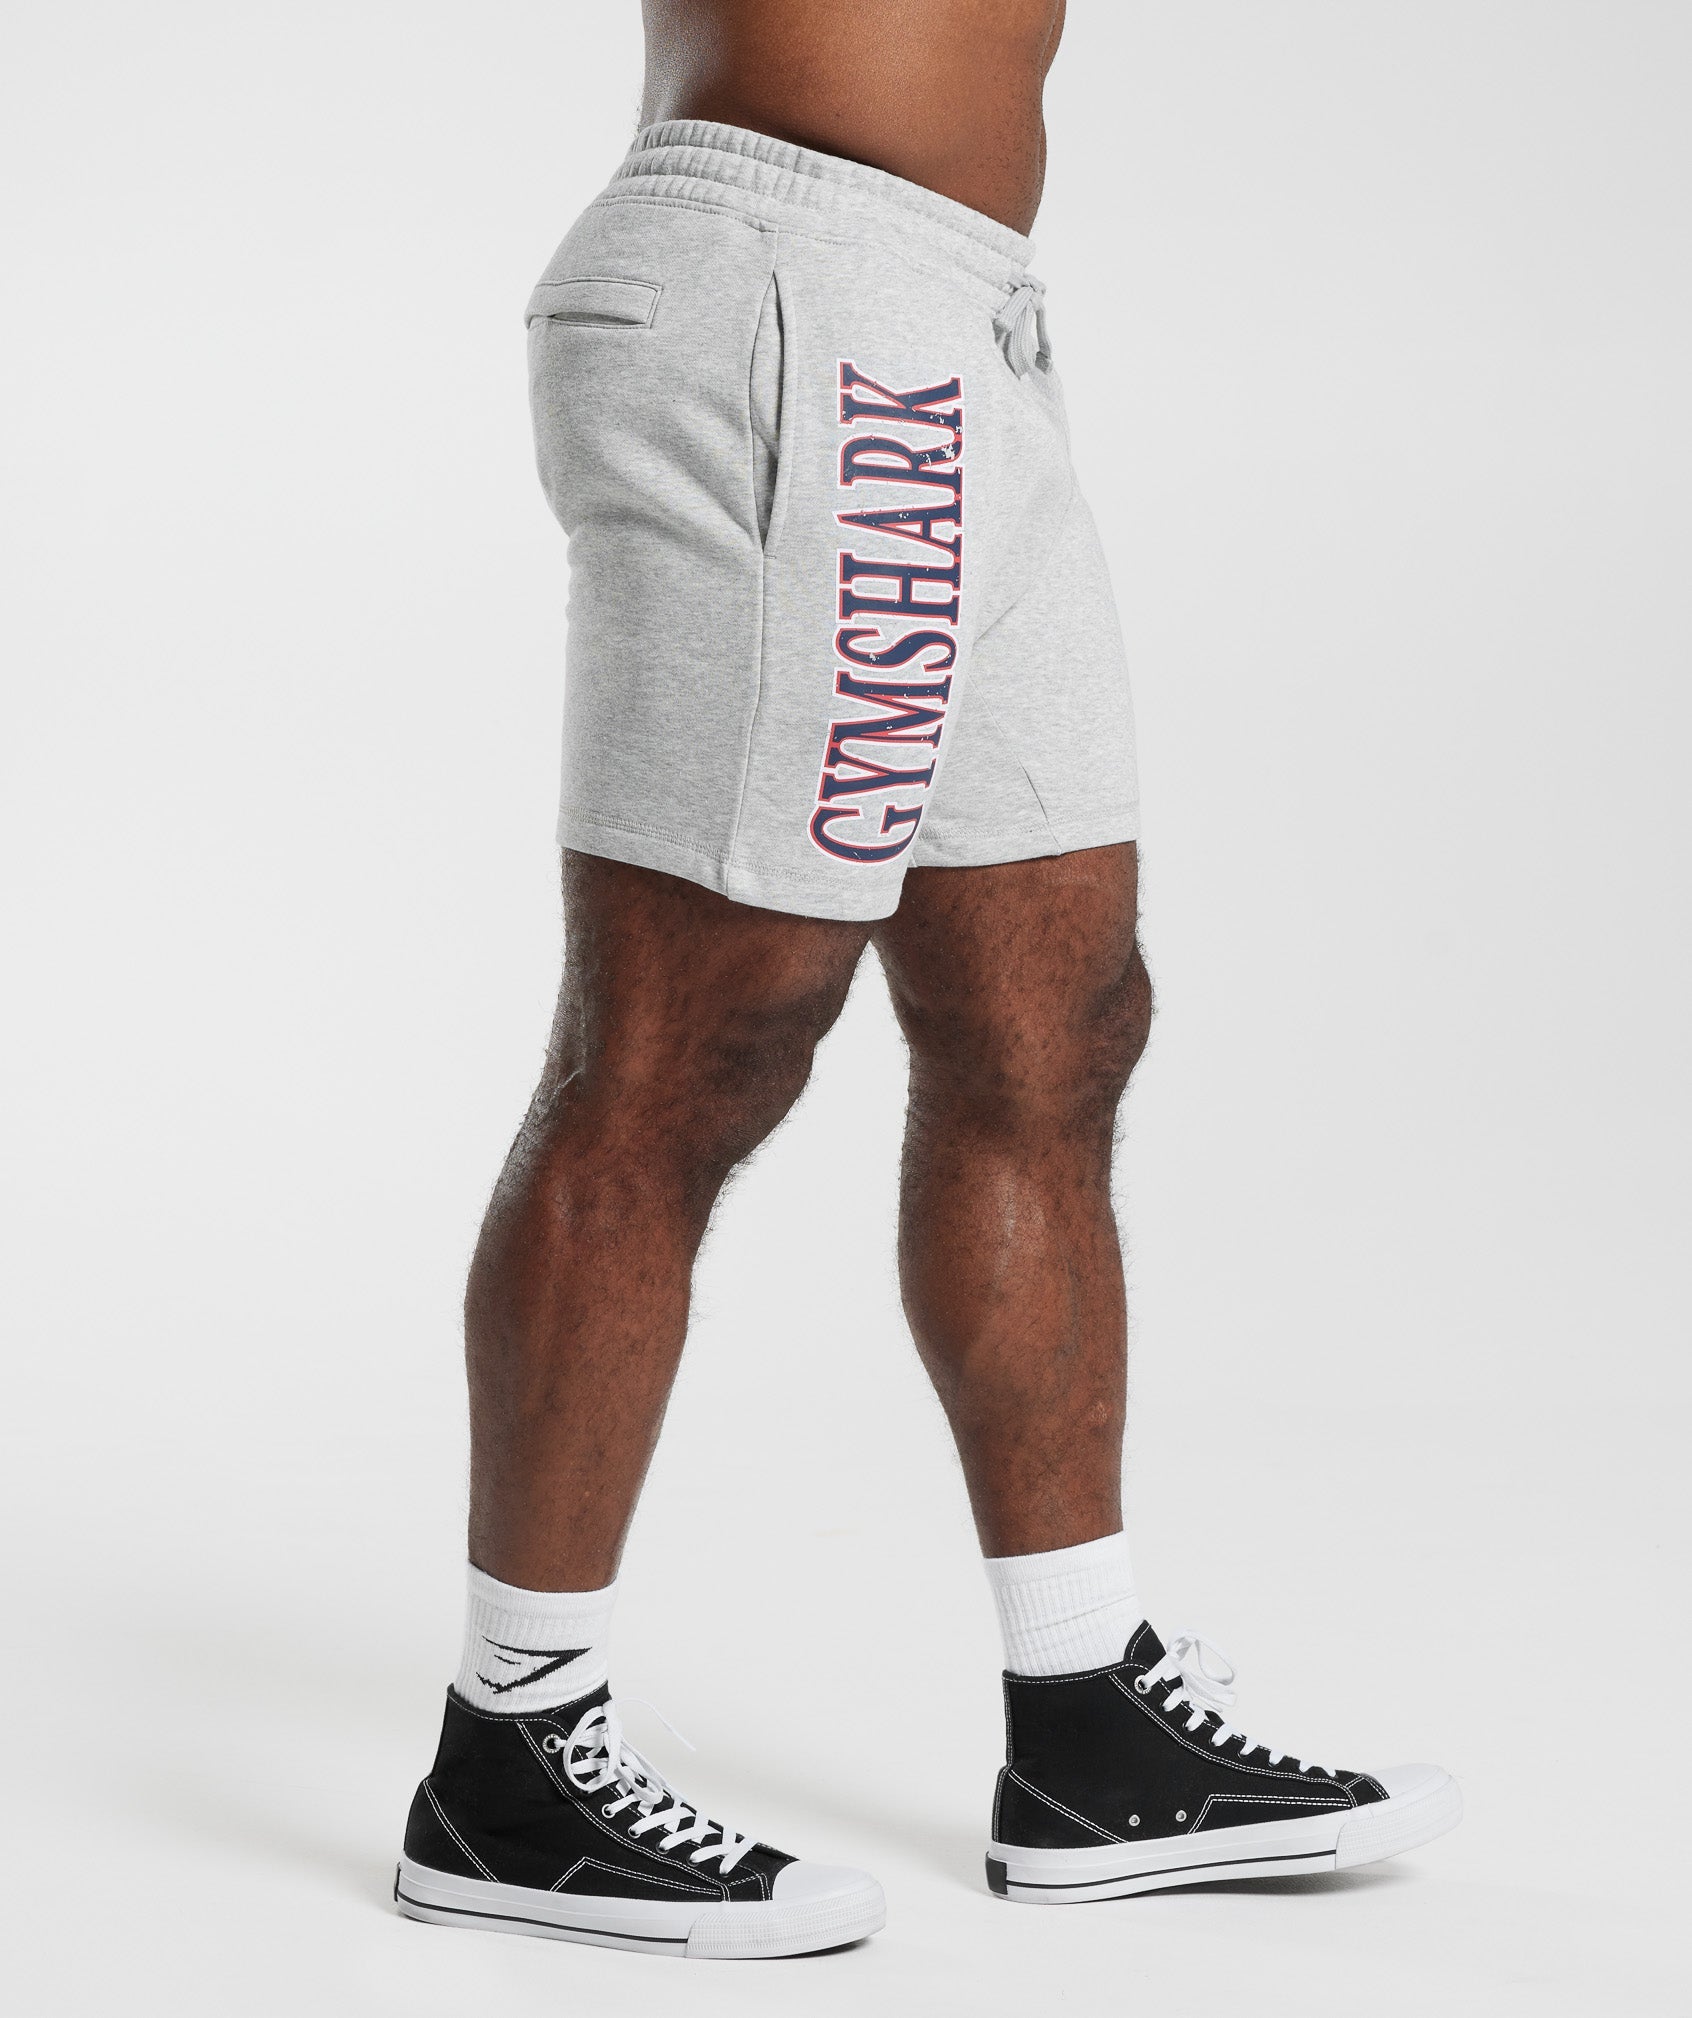 Retrowave Shorts in Light Grey Core Marl - view 3